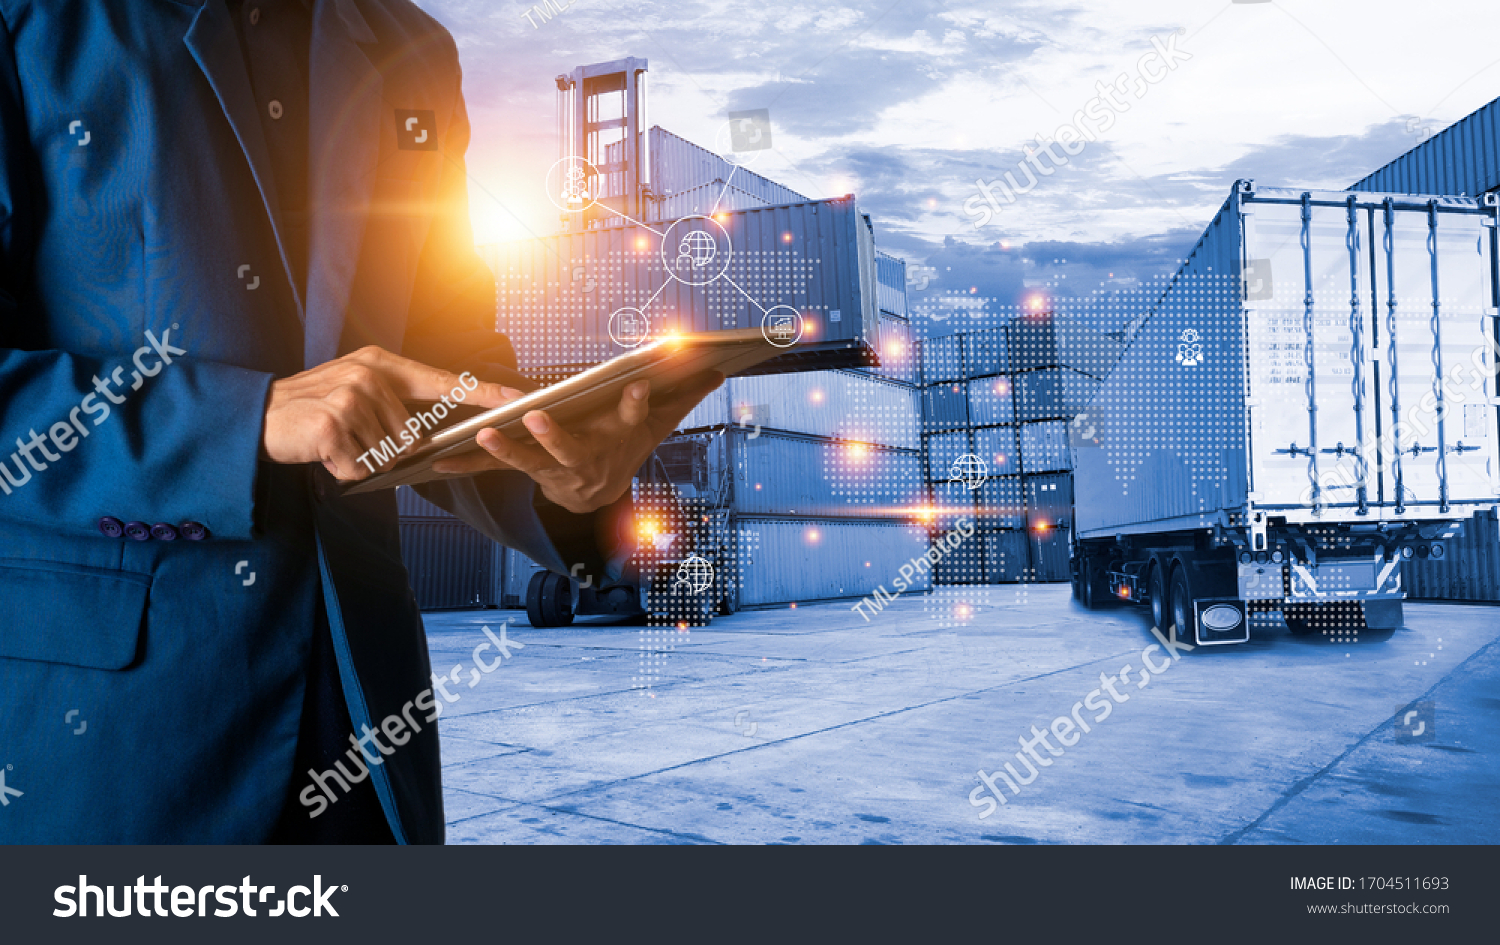 Global logistic or world of logistic concept. Businessman or manager using tablet standing with world map icon and shipping yard container and truck of transport background. fast or instant shipping. #1704511693